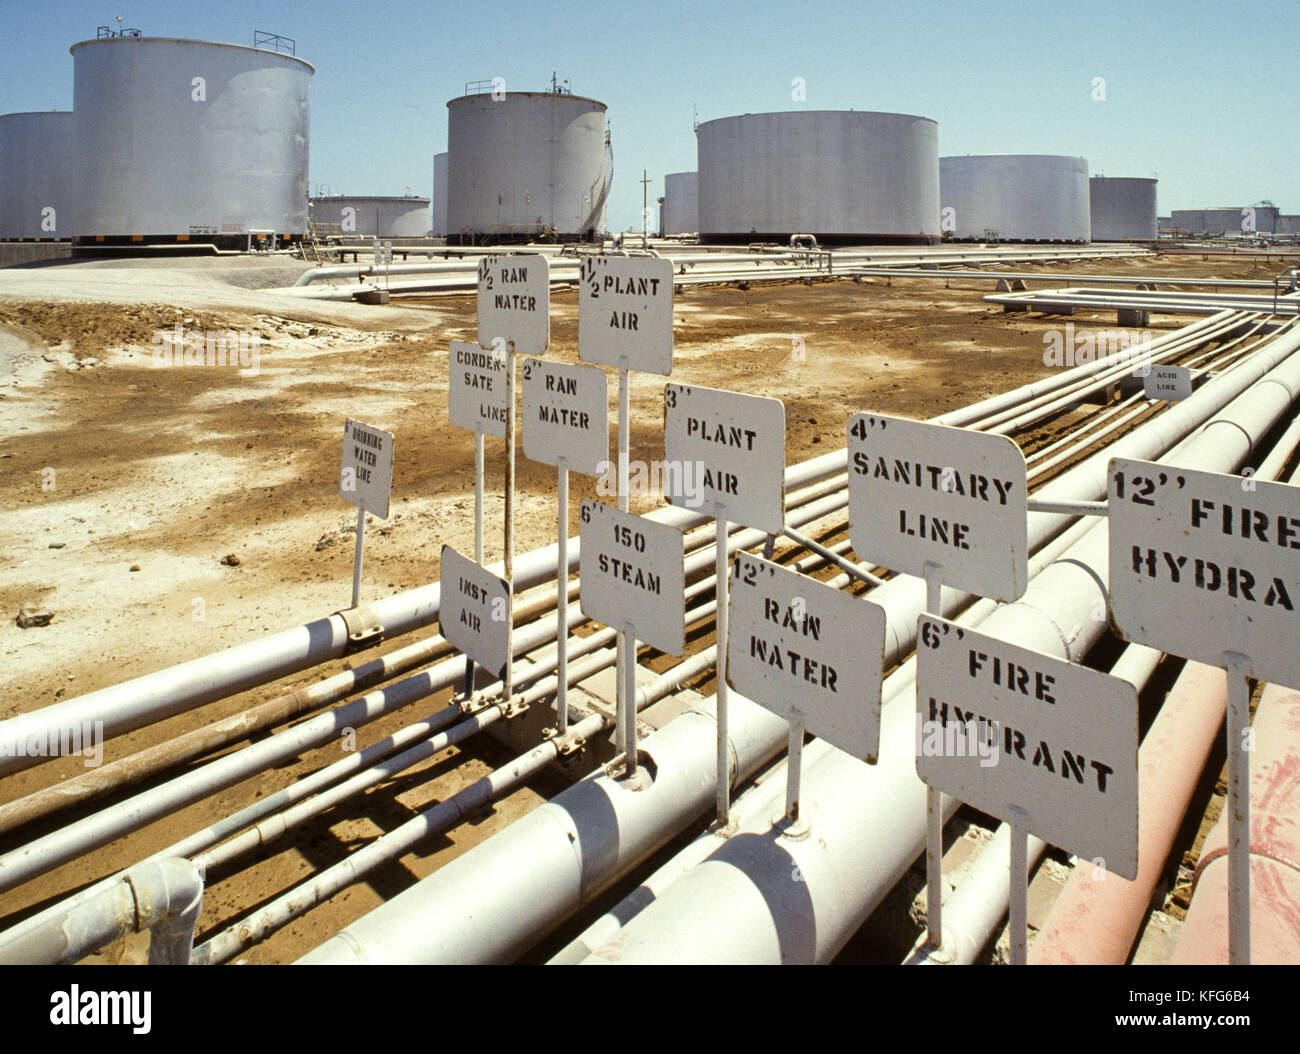 The Ras Tanura oil refinery, largest in the world, owned and operated by Saudi Aramco, situated in the eastern oil rich province on the shores of the Arabian Gulf. Stock Photo